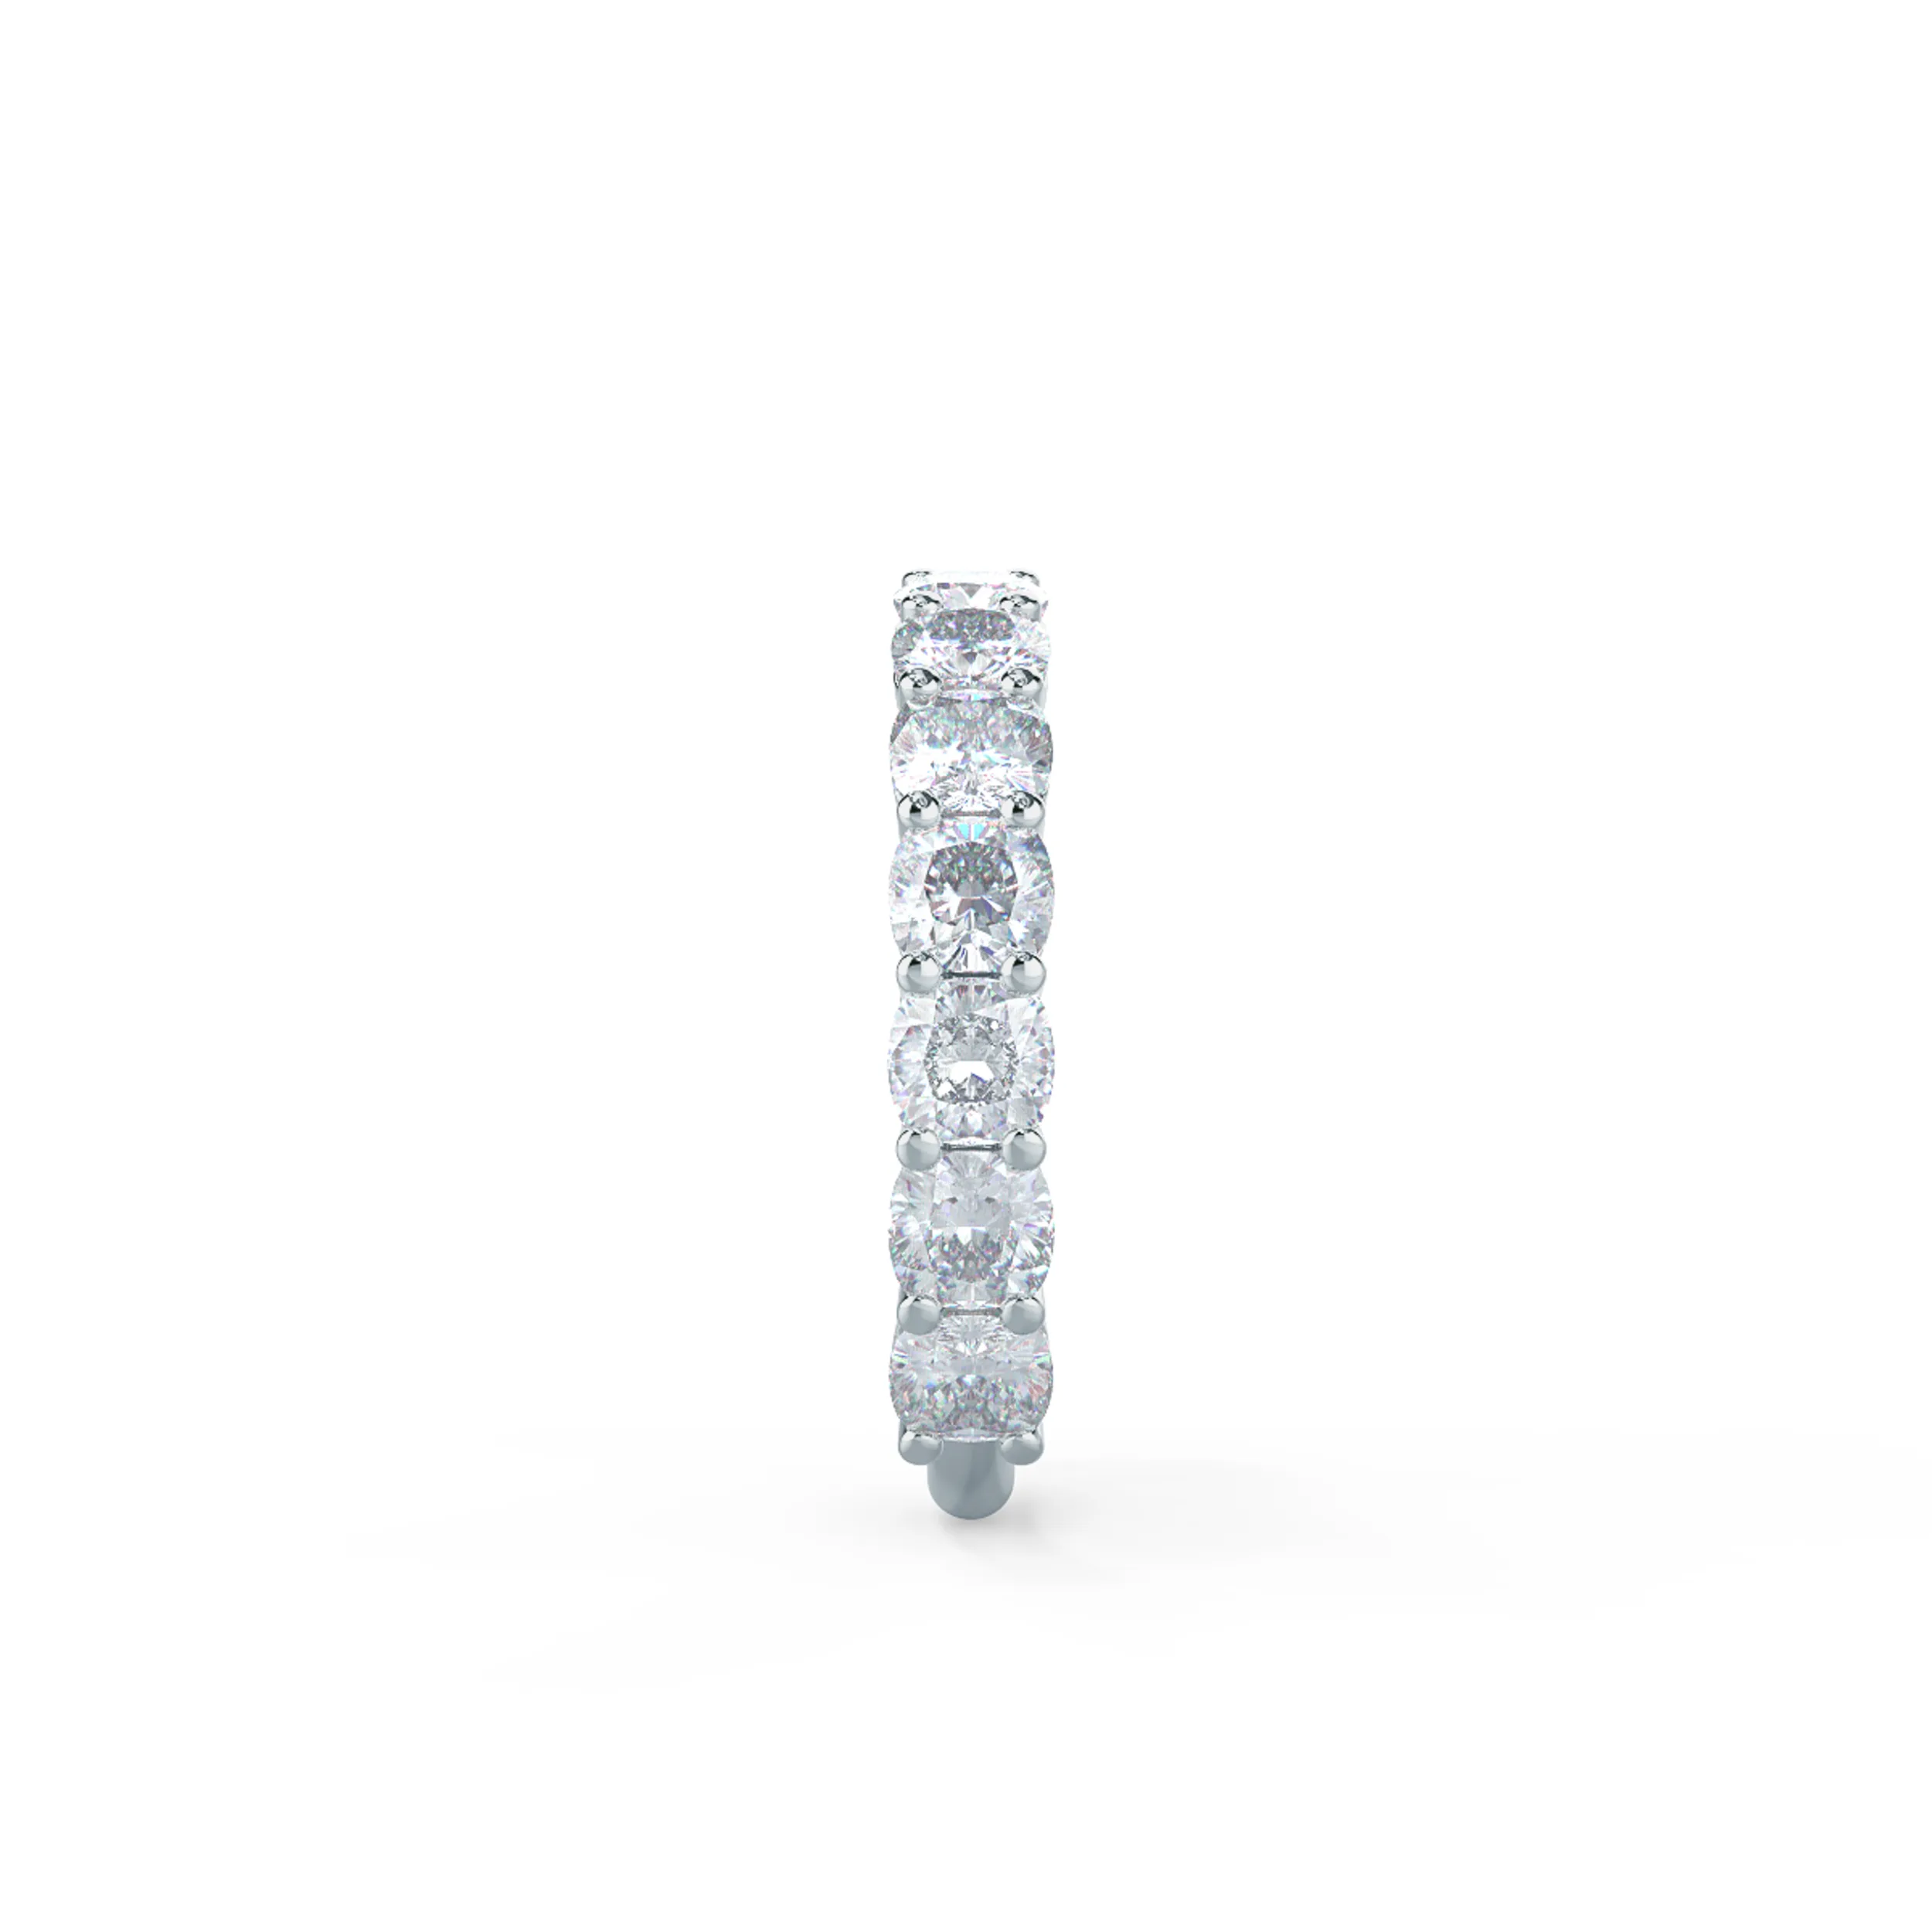 18k White Gold Cushion Three Quarter Band featuring Hand Selected 3.5 ctw Diamonds (Side View)